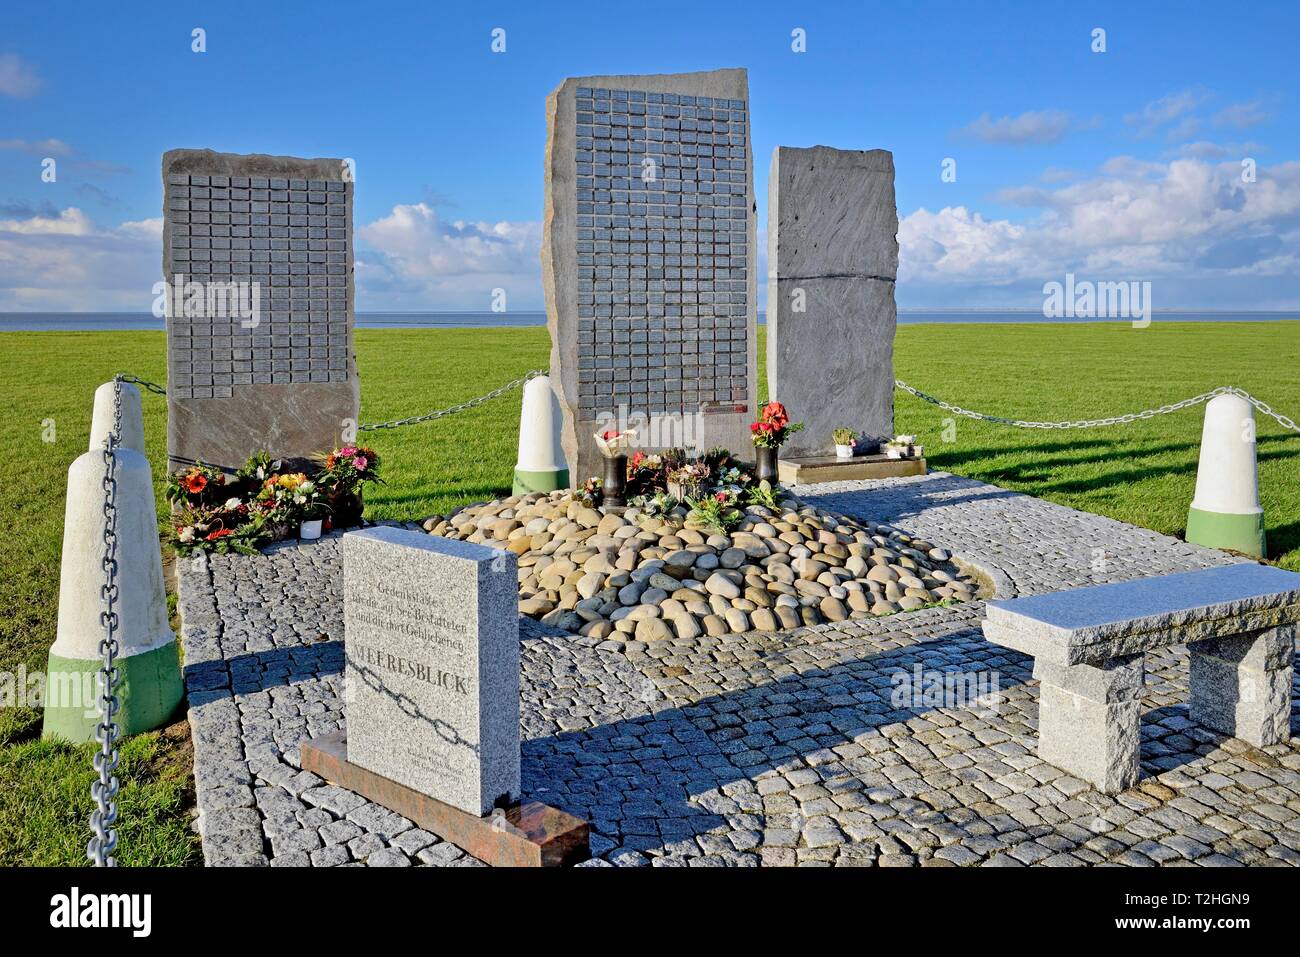 Burial at sea, memorial site Meeresblick, west harbour of Norddeich, North Sea, Lower Saxony, Germany Stock Photo